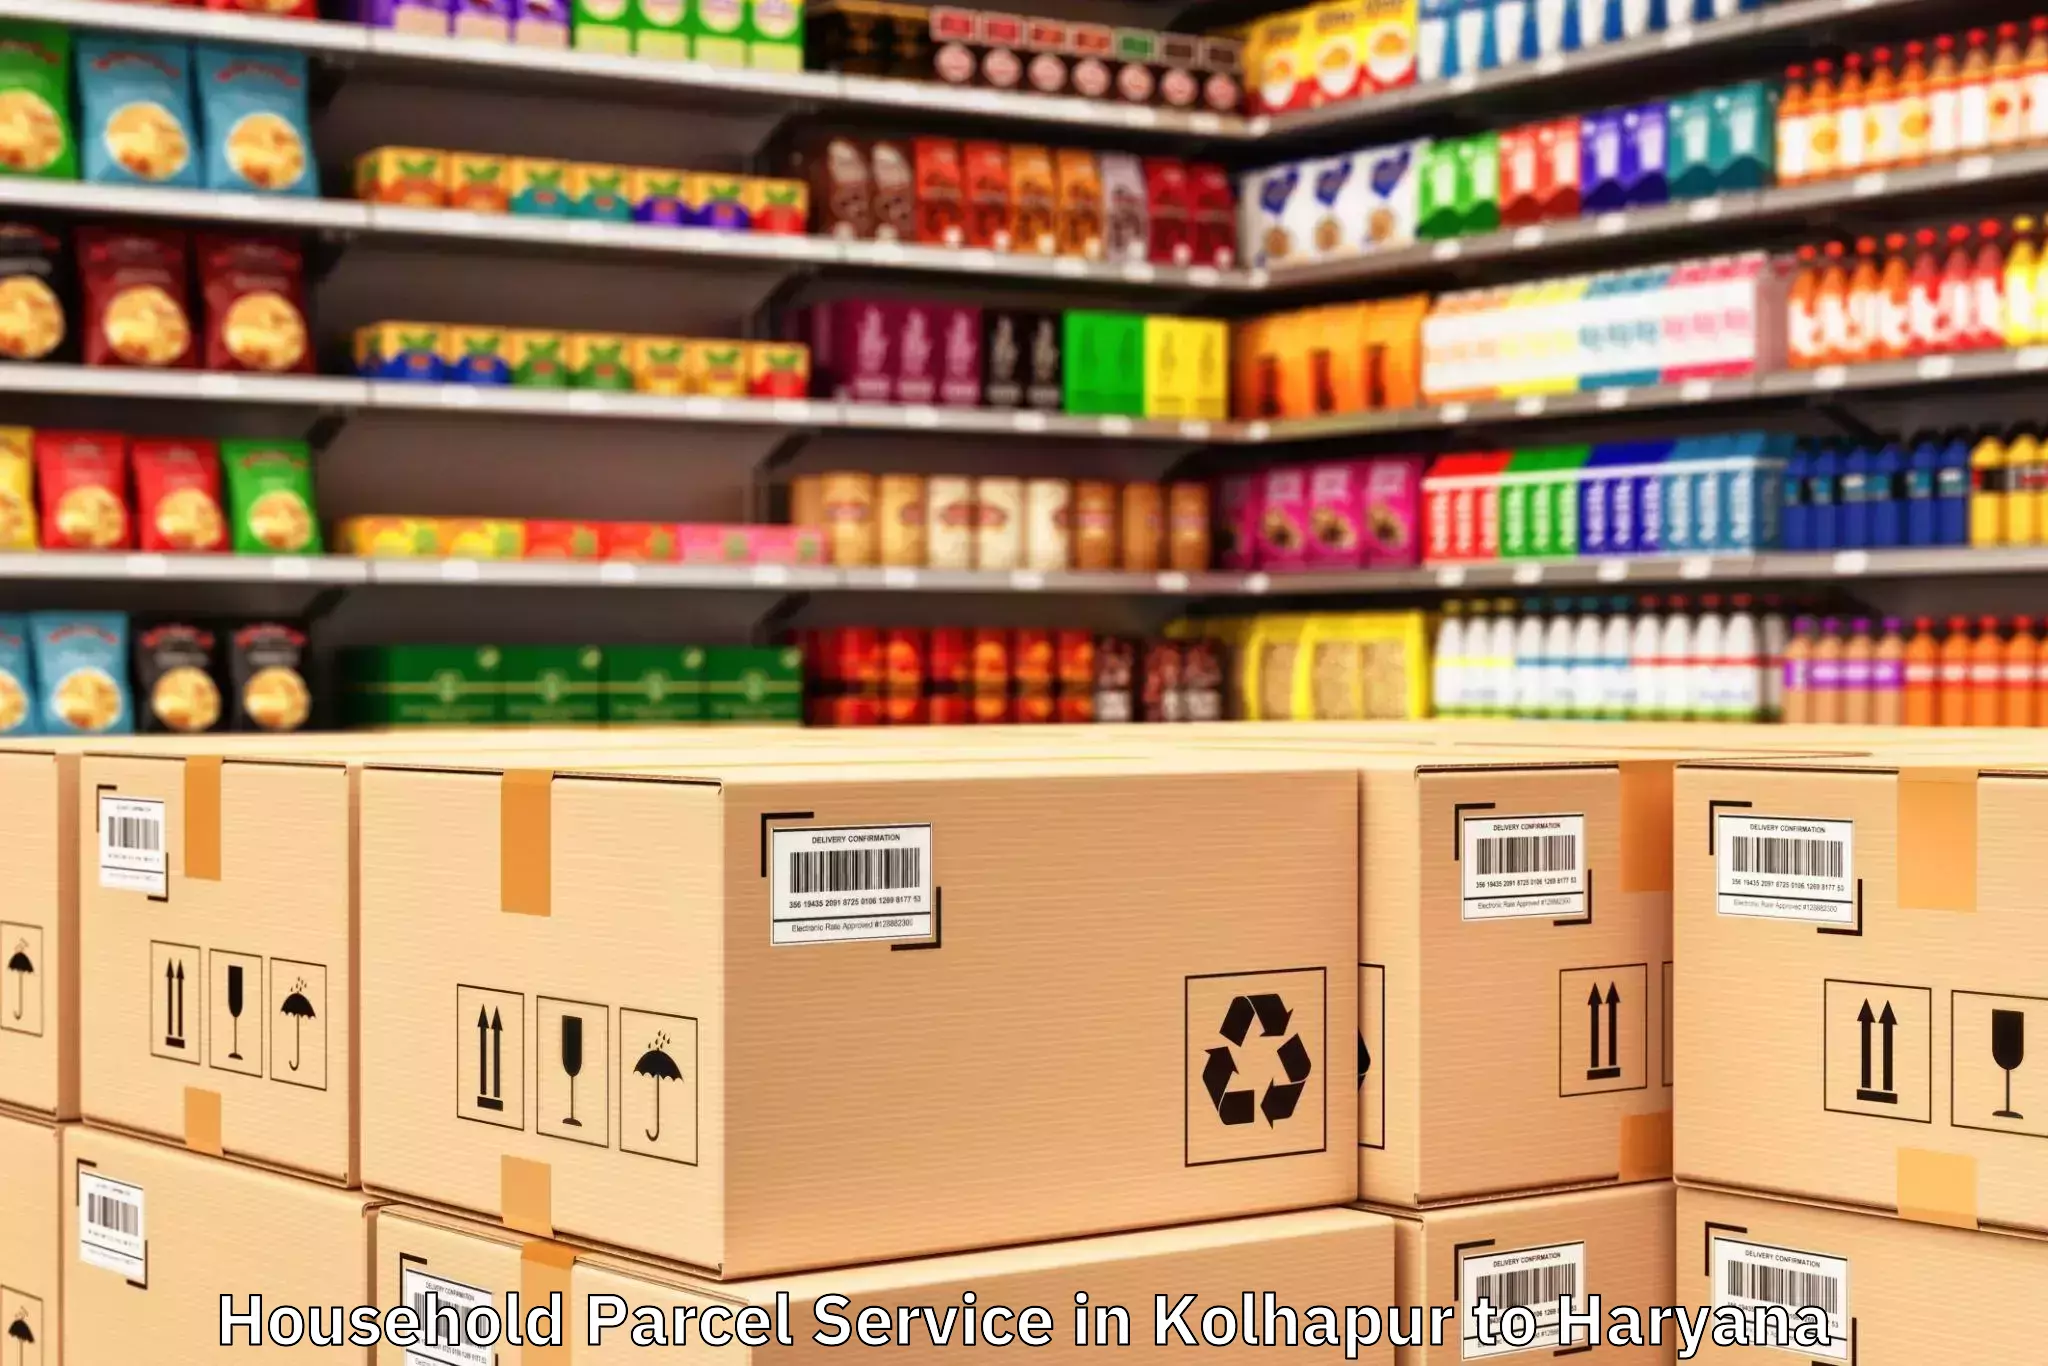 Easy Kolhapur to Hathin Household Parcel Service Booking